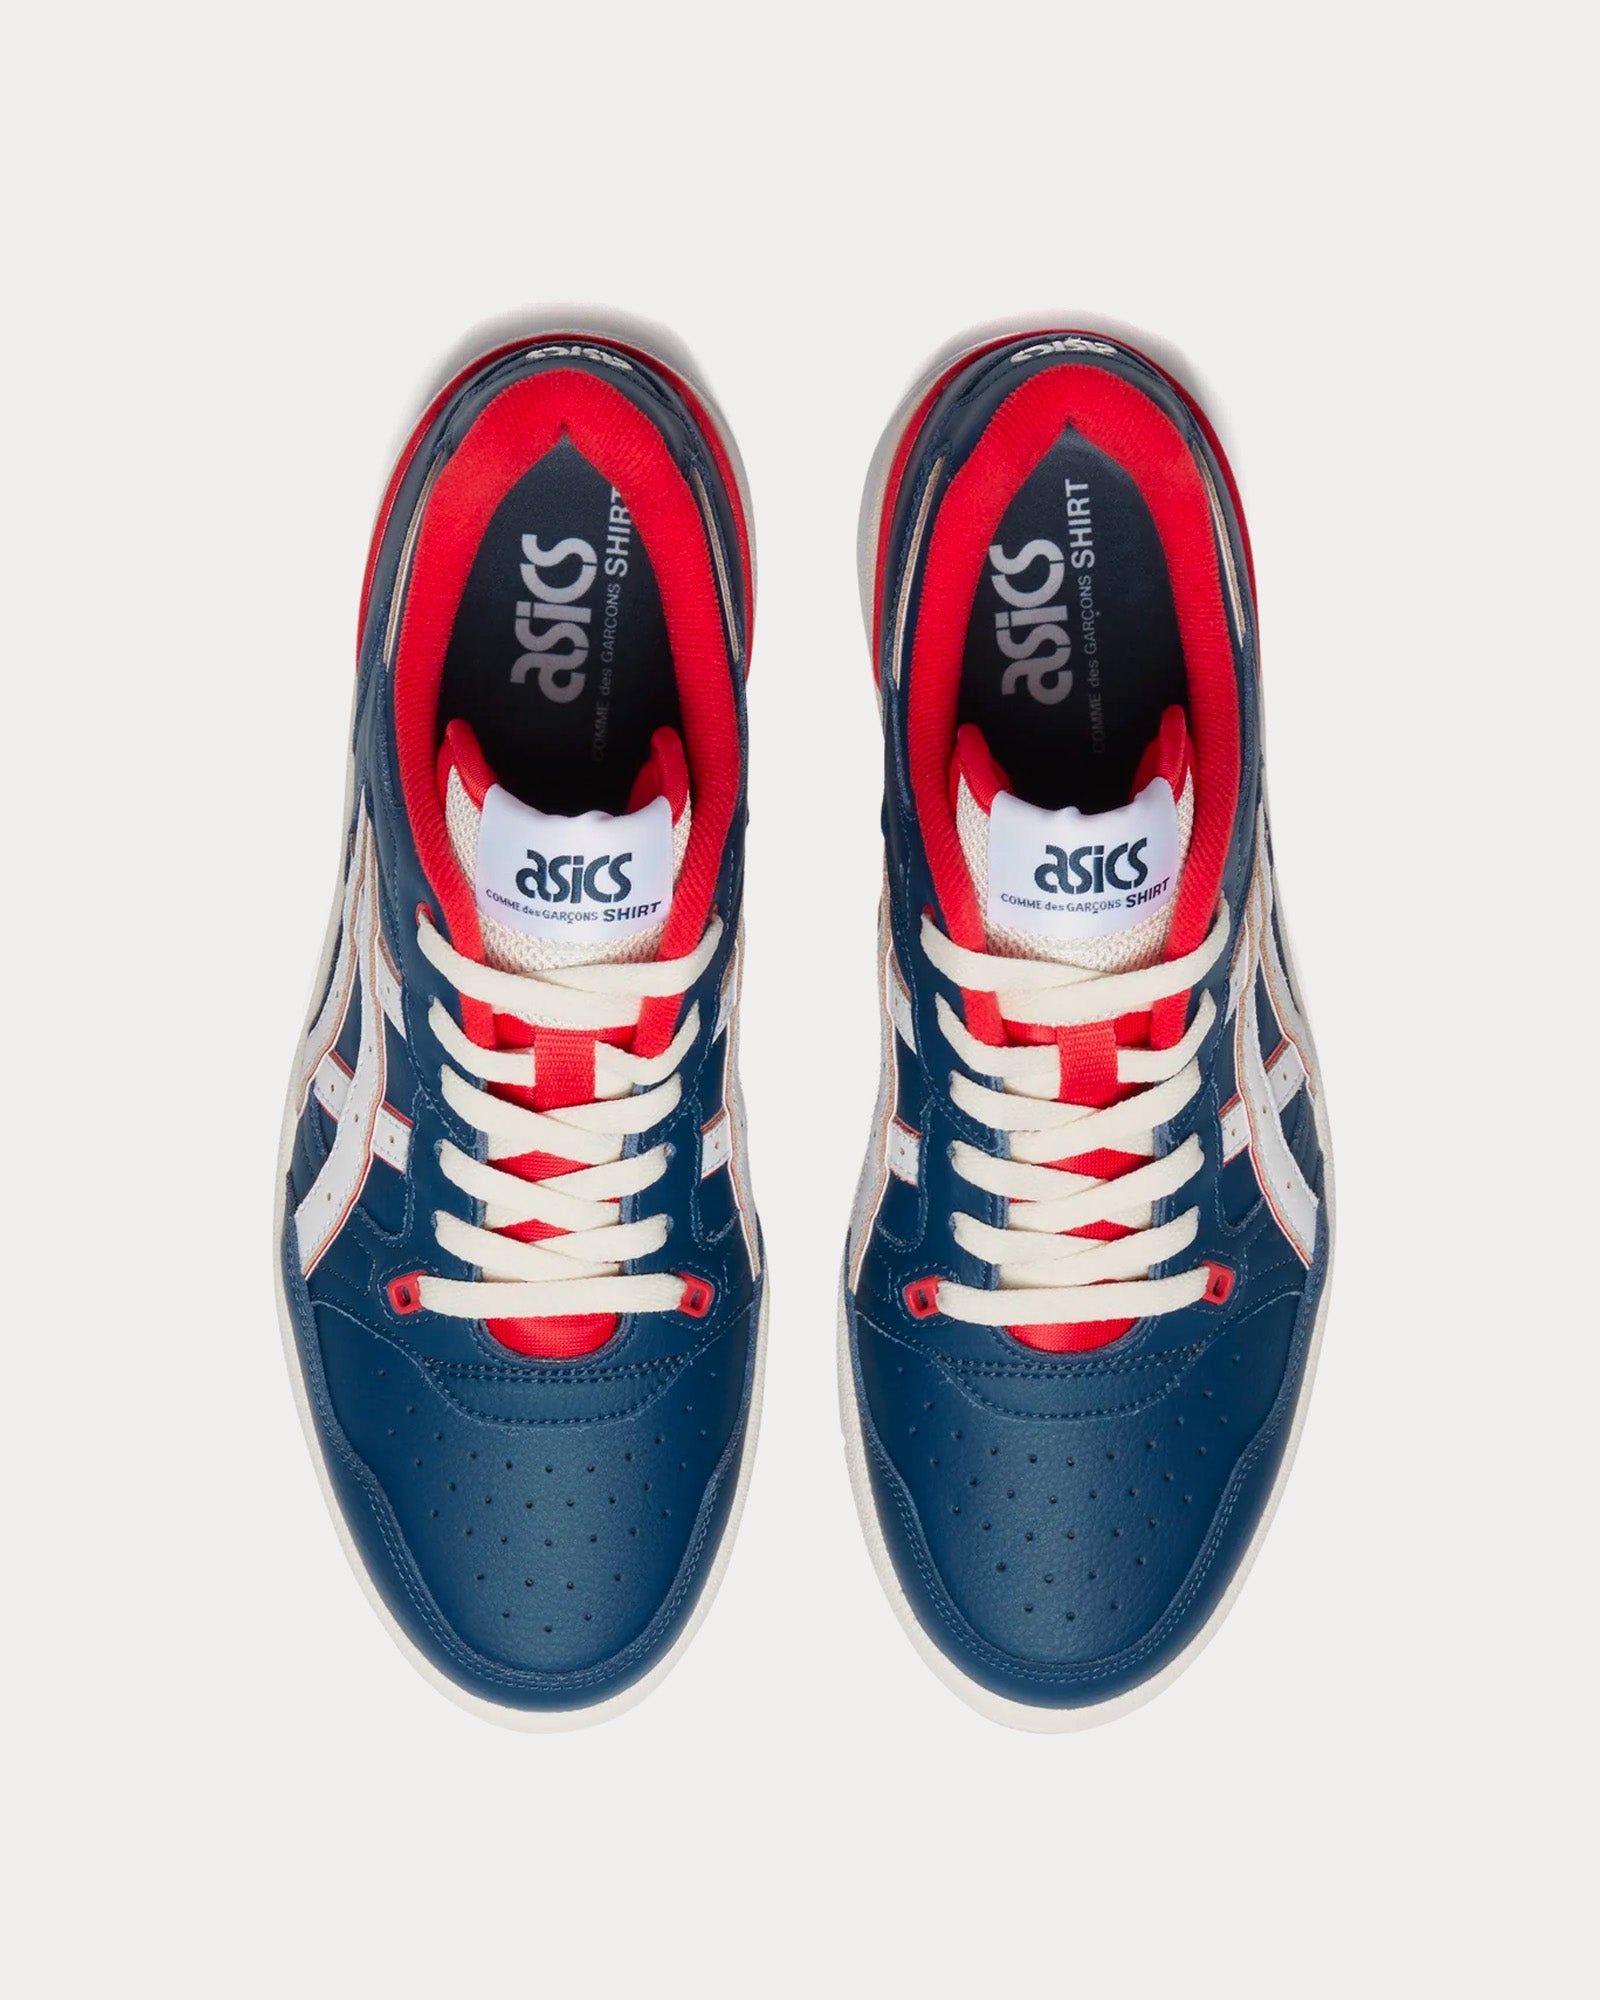 Asics x CDG Shirt - EX89 Navy / White / Red Low Top Sneakers